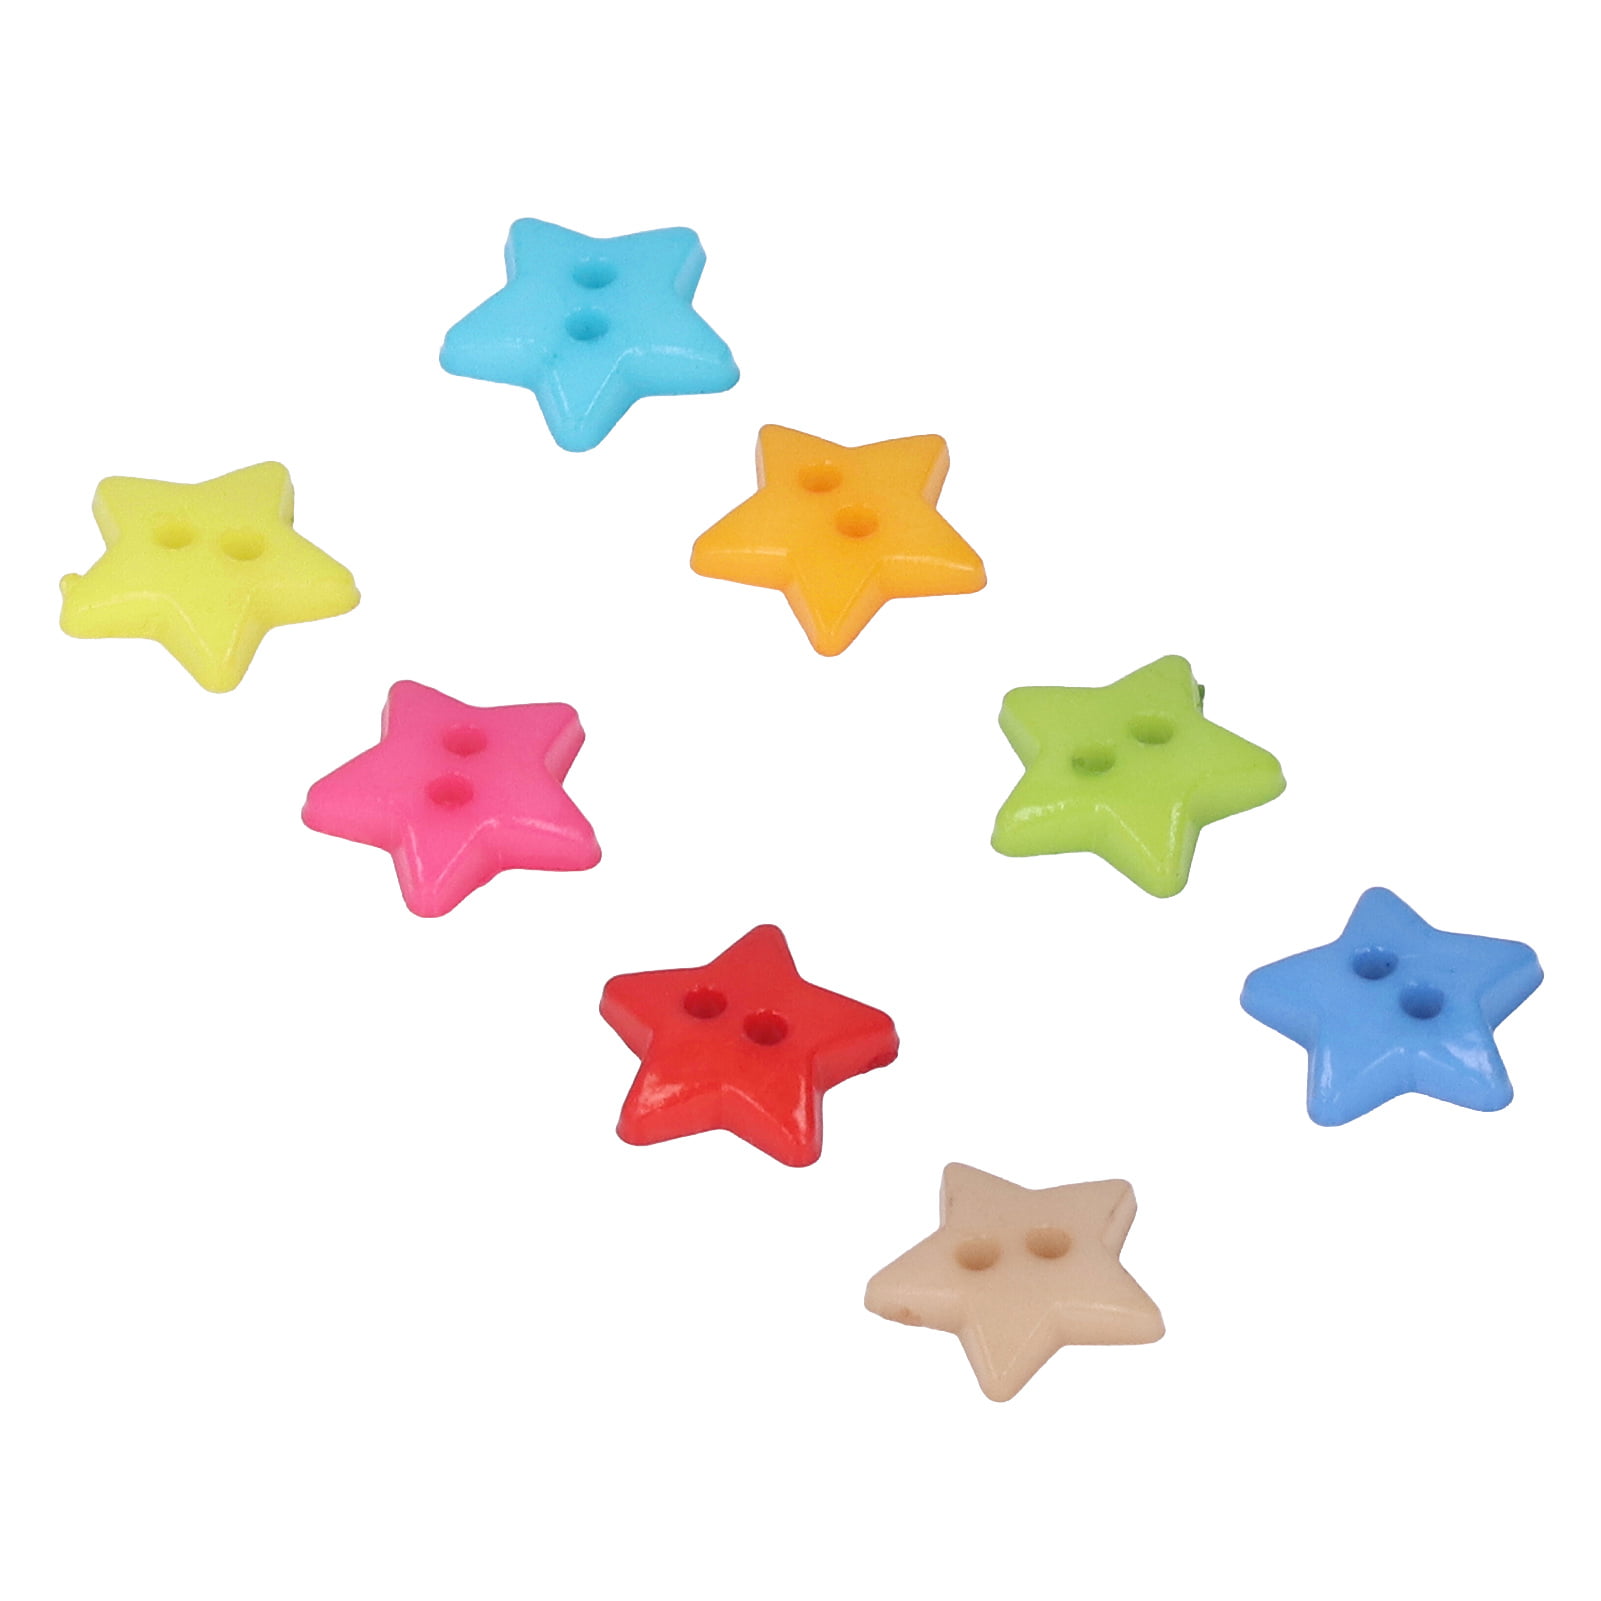 Sewing Buttons, Cute Small Smoothing Cutting Edge Unique Design 200 Pcs Star  Buttons Colorful For DIY Crafts For Sewing For Decoration 